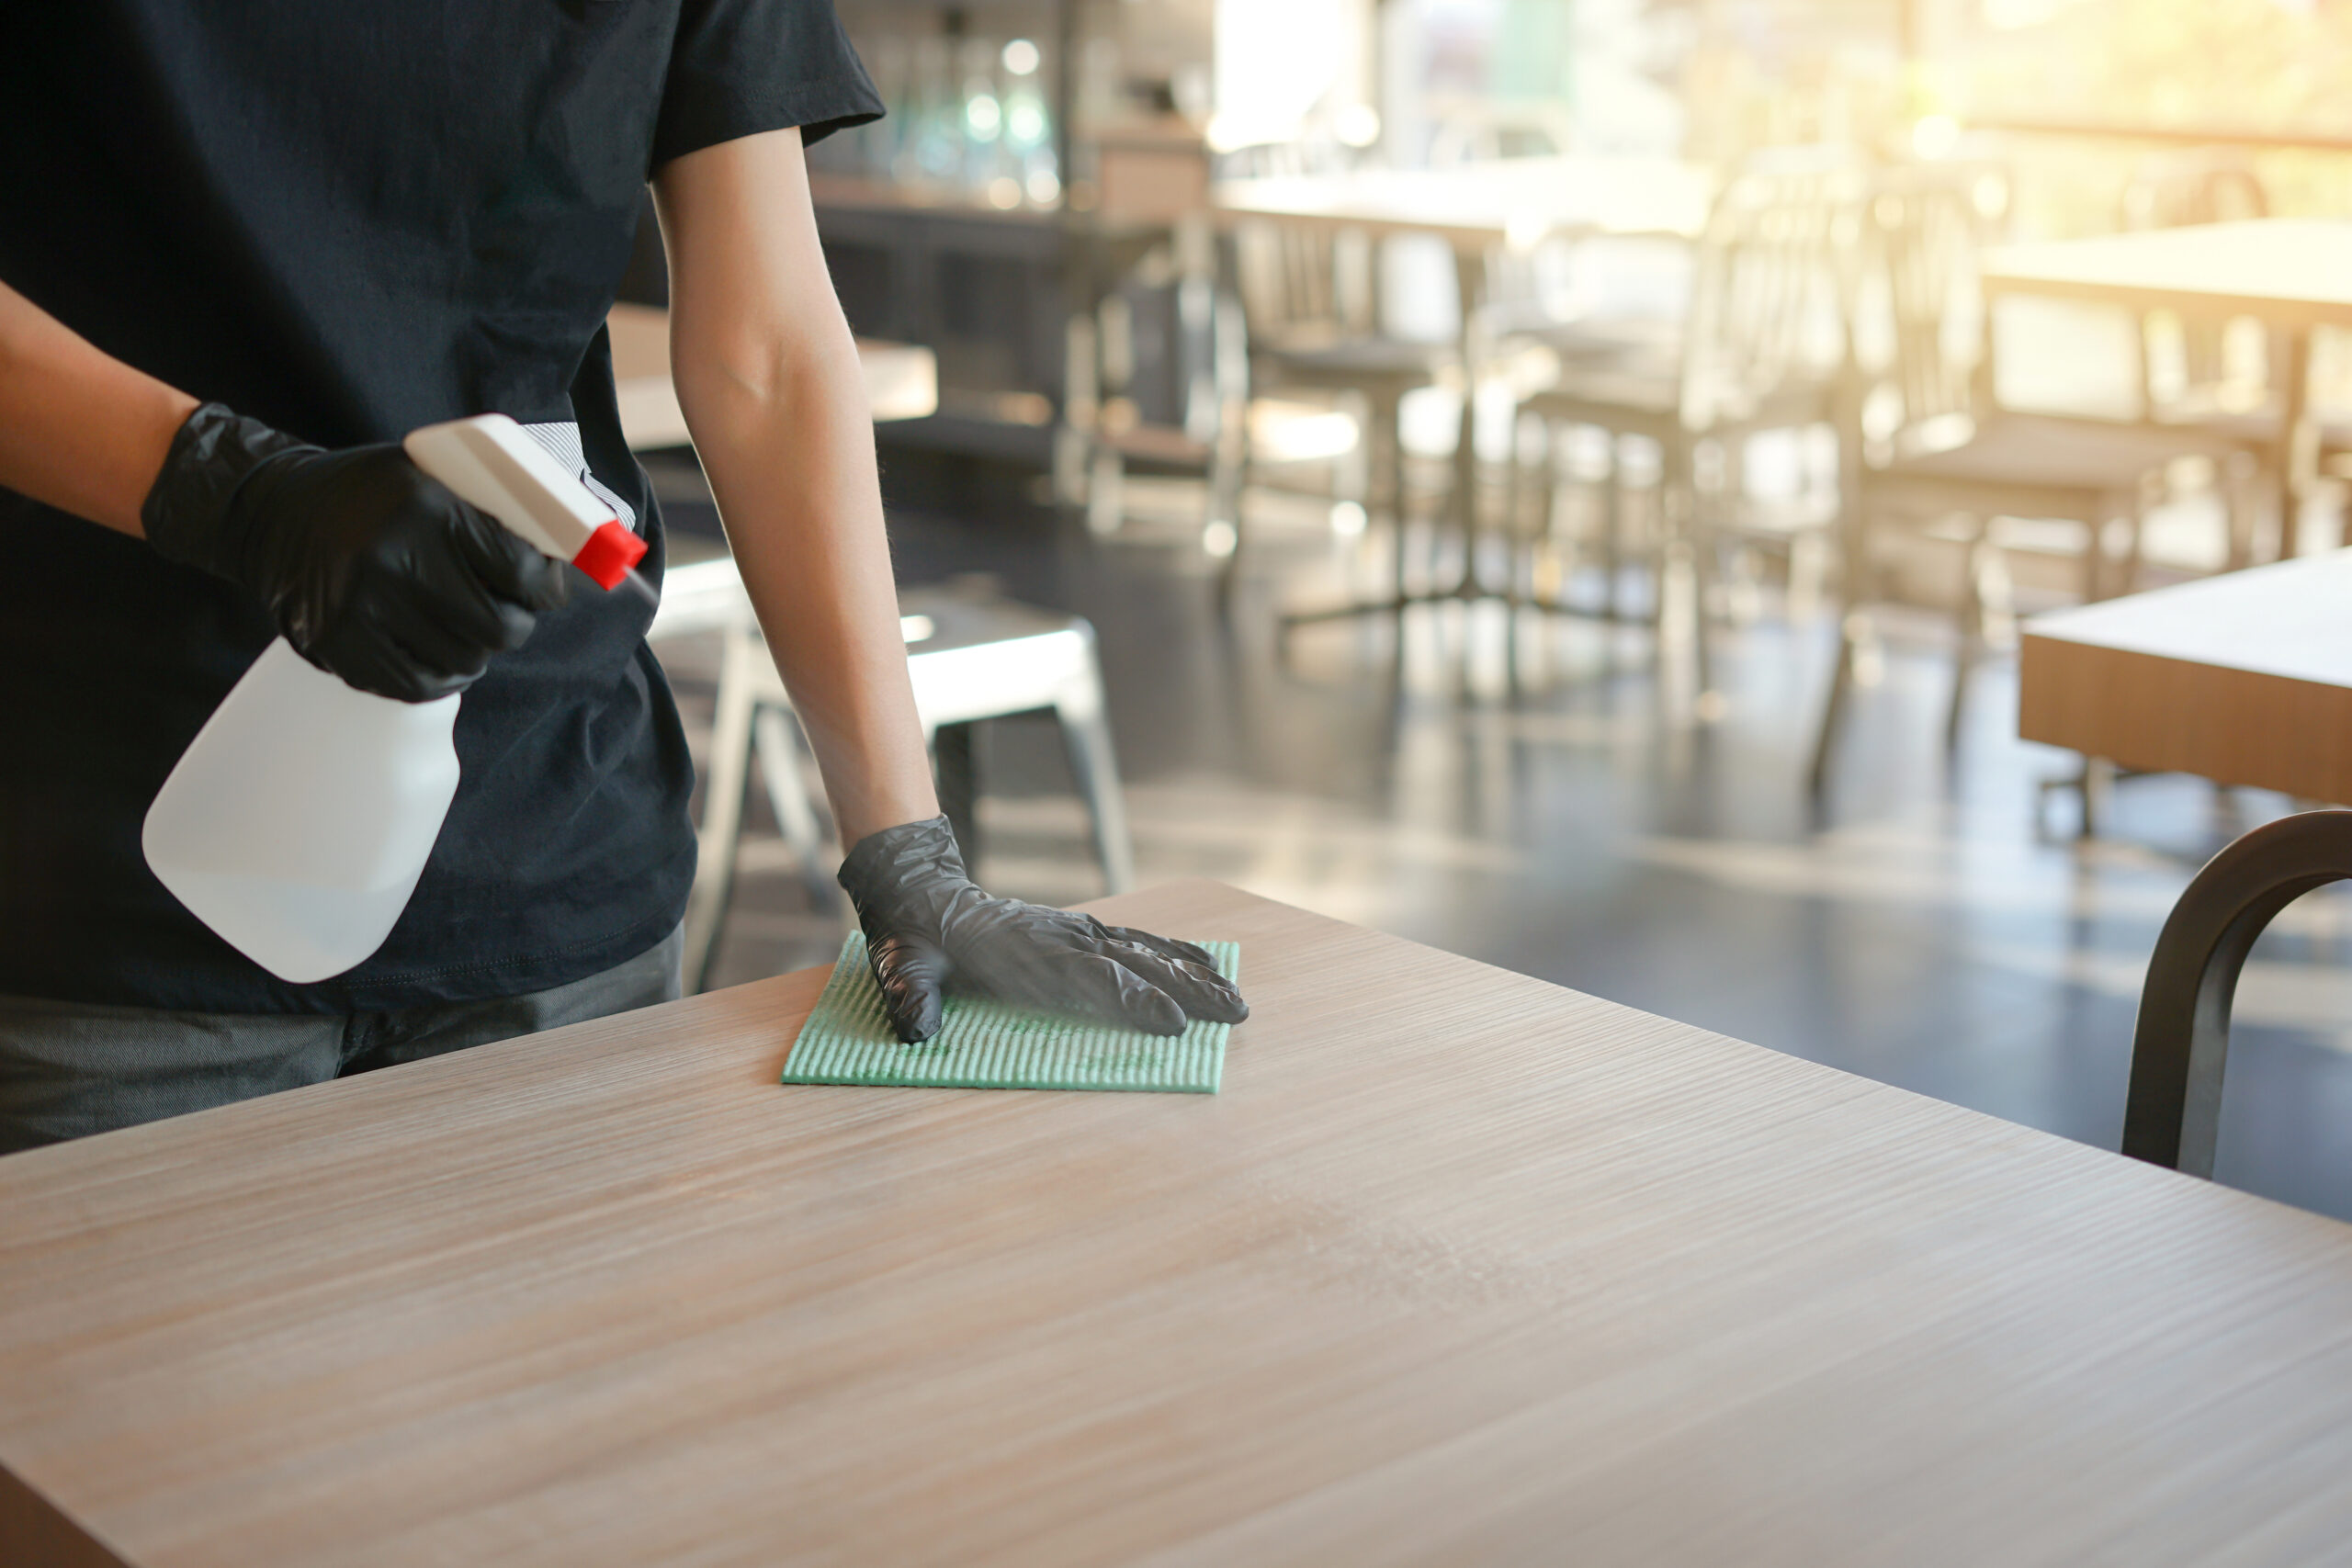 Restaurant Cleanliness and Why It’s Important